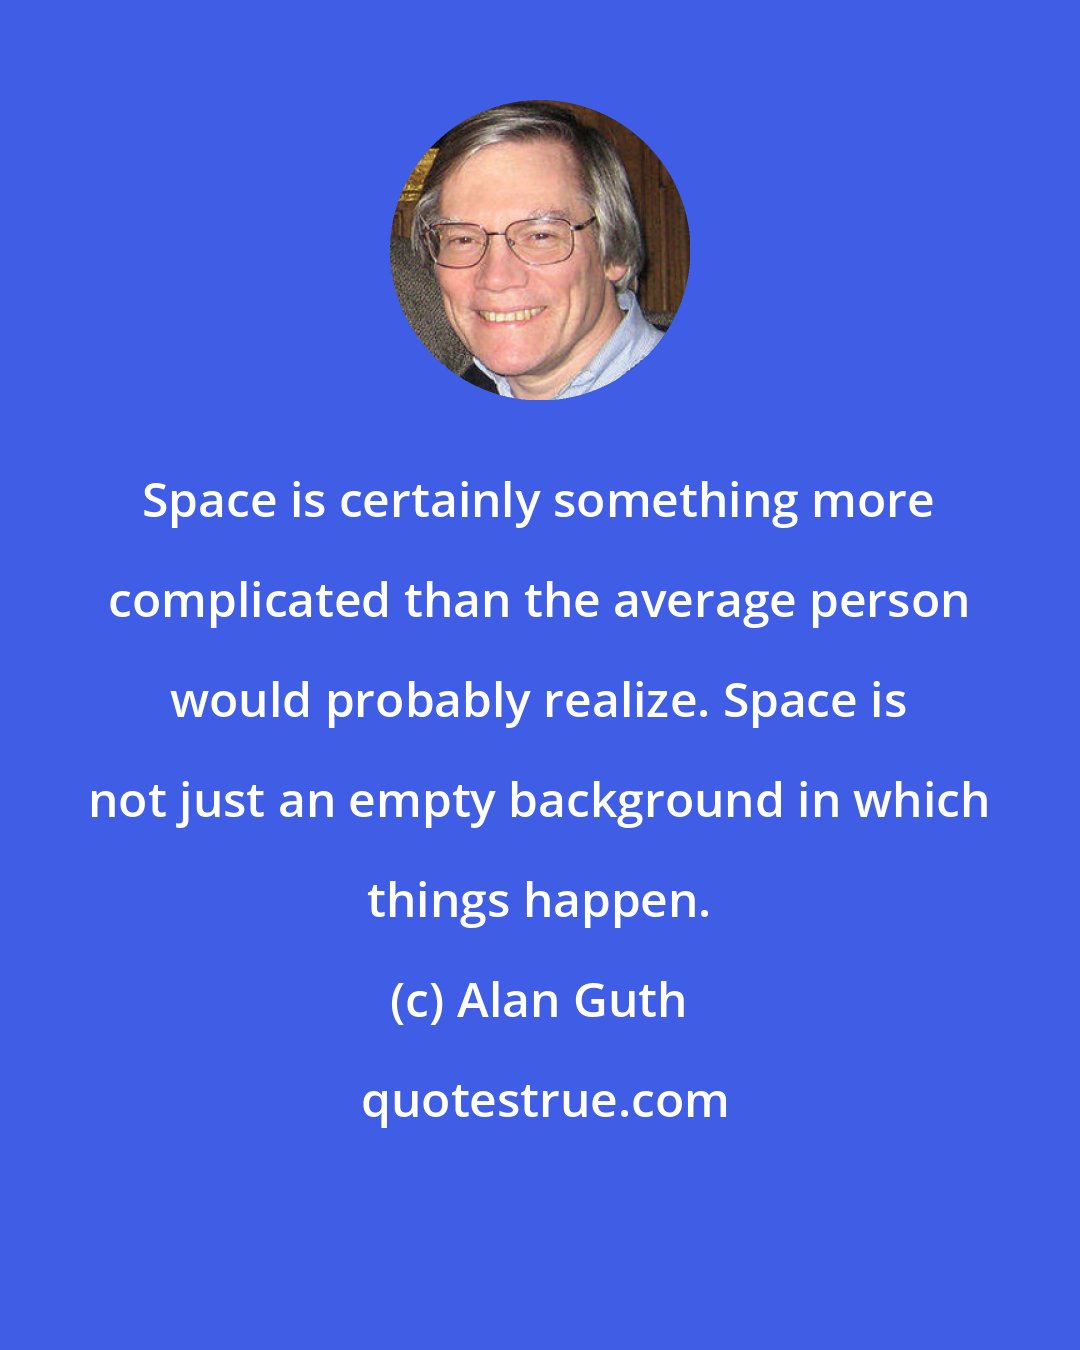 Alan Guth: Space is certainly something more complicated than the average person would probably realize. Space is not just an empty background in which things happen.